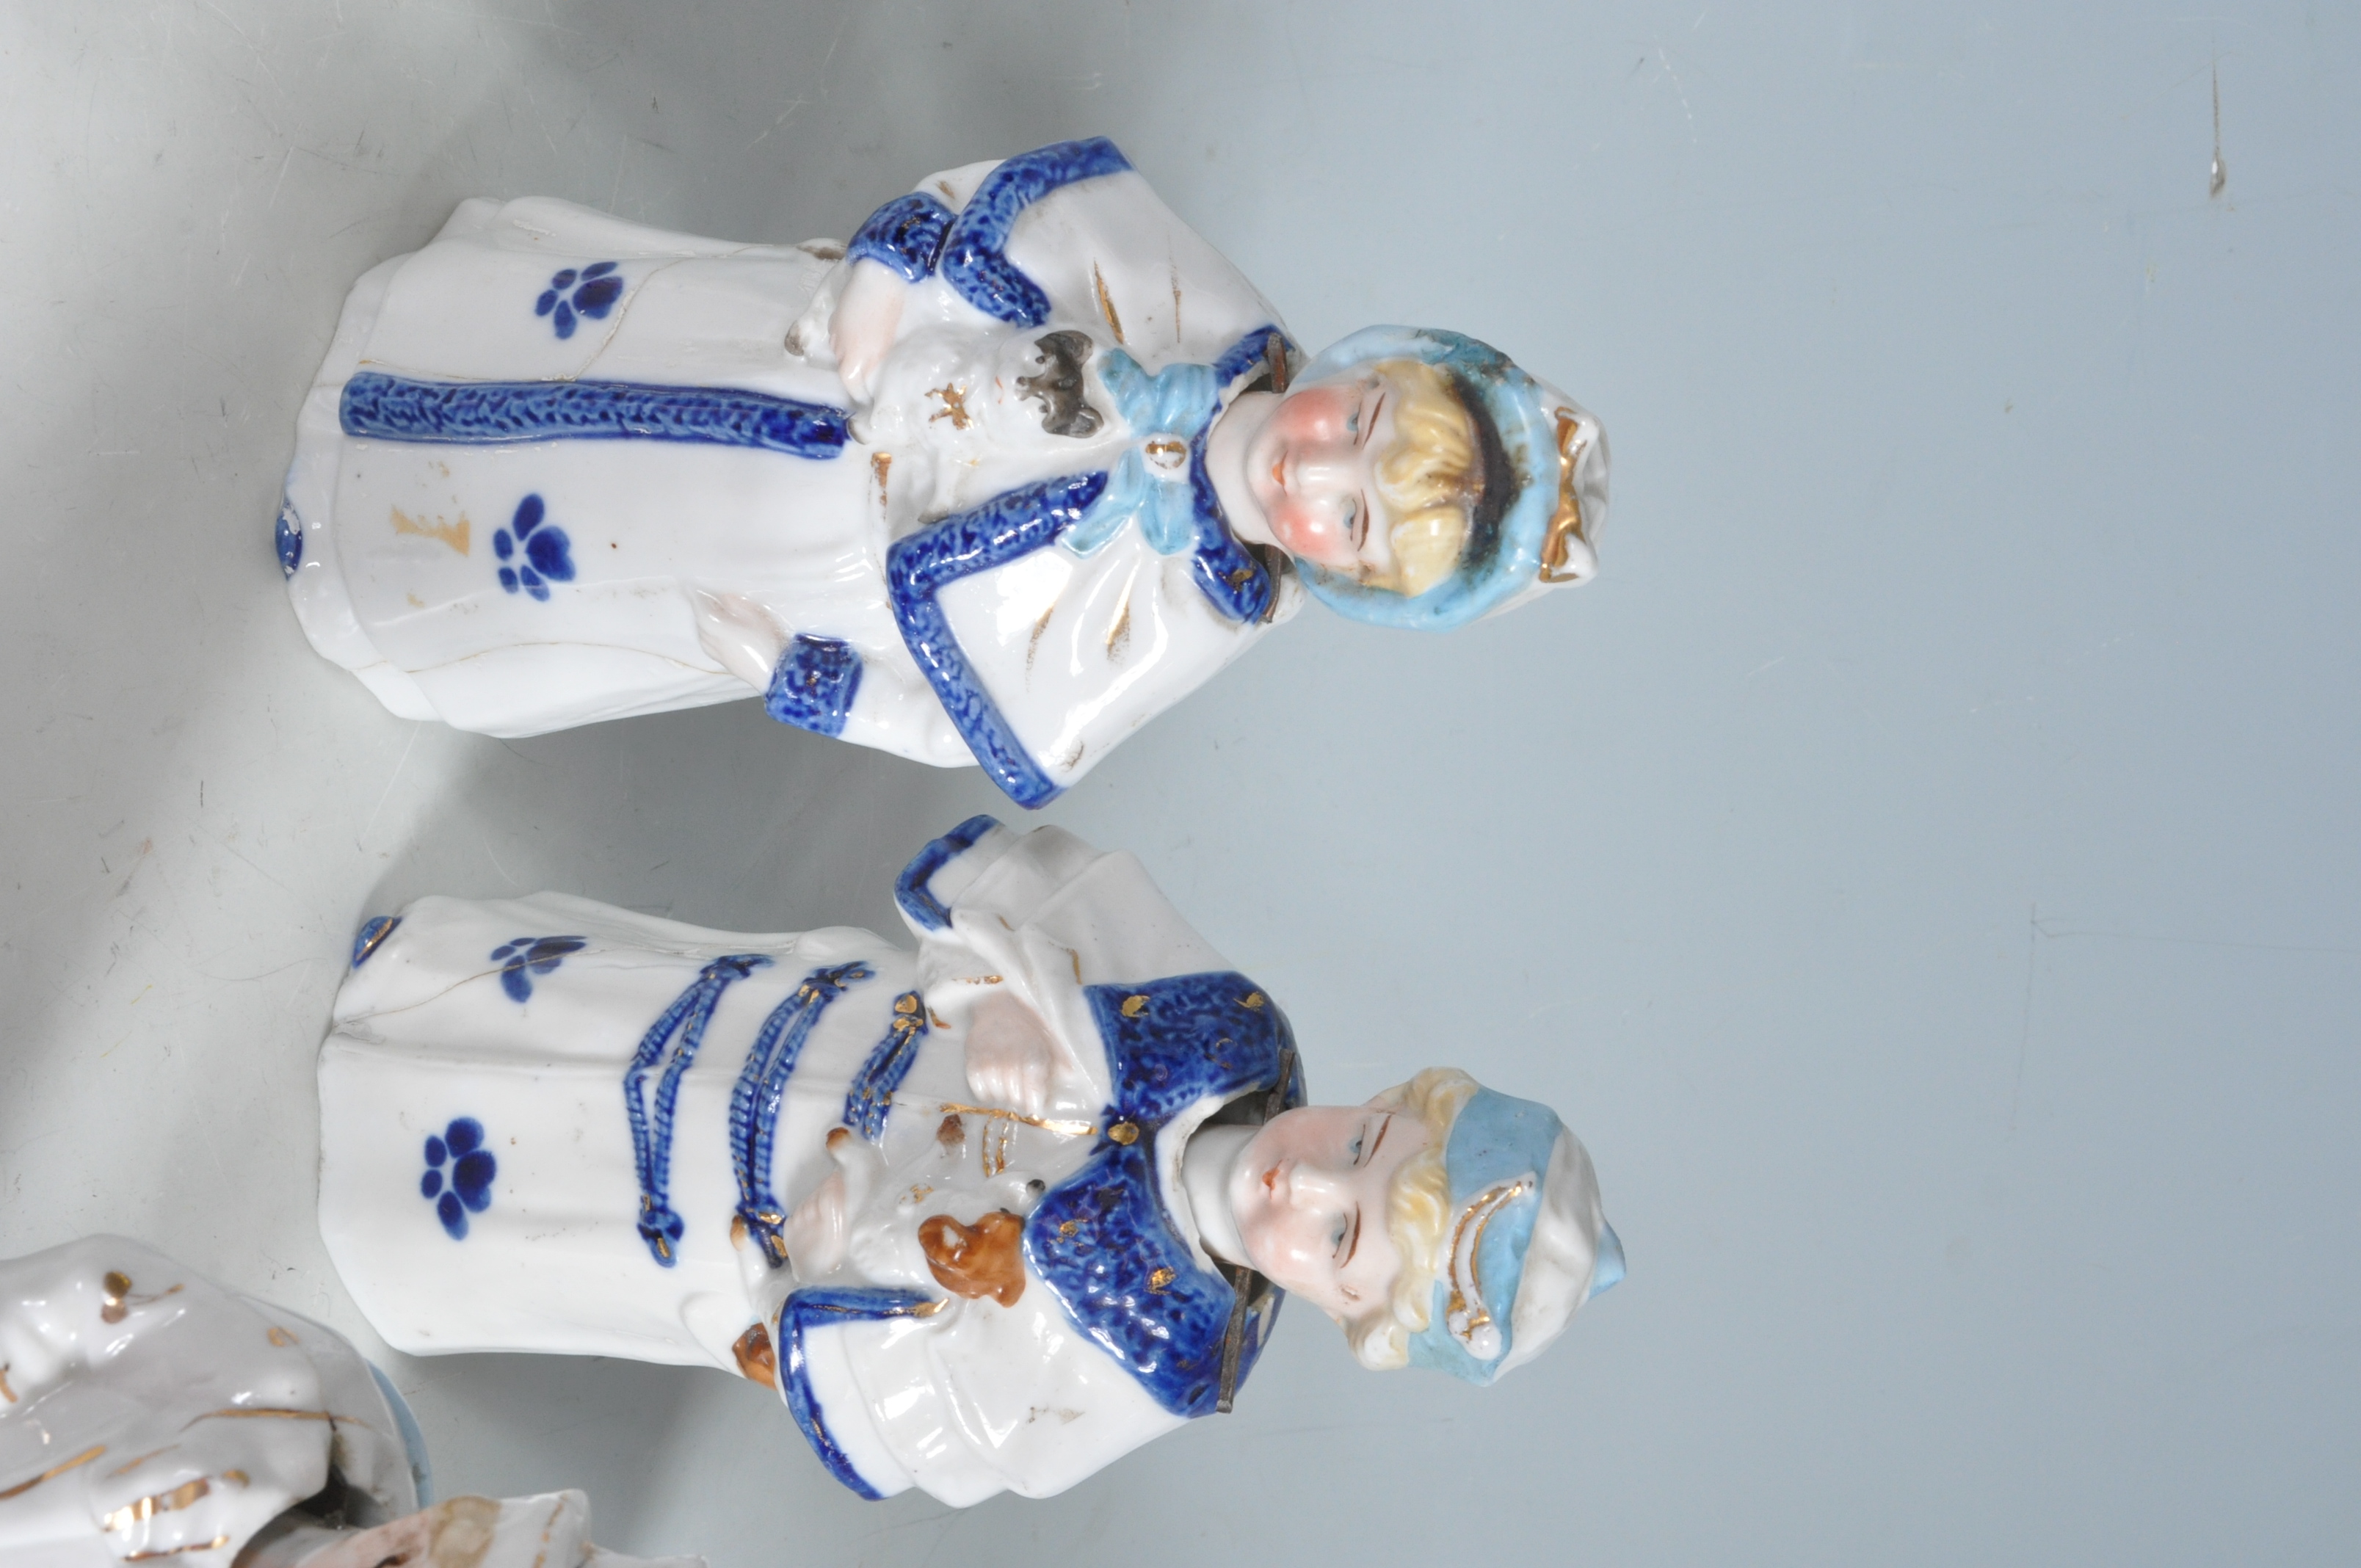 COLLECTION OF LATE 19TH EARLY 20TH CENTURY NODDER FIGURINES - Image 6 of 9